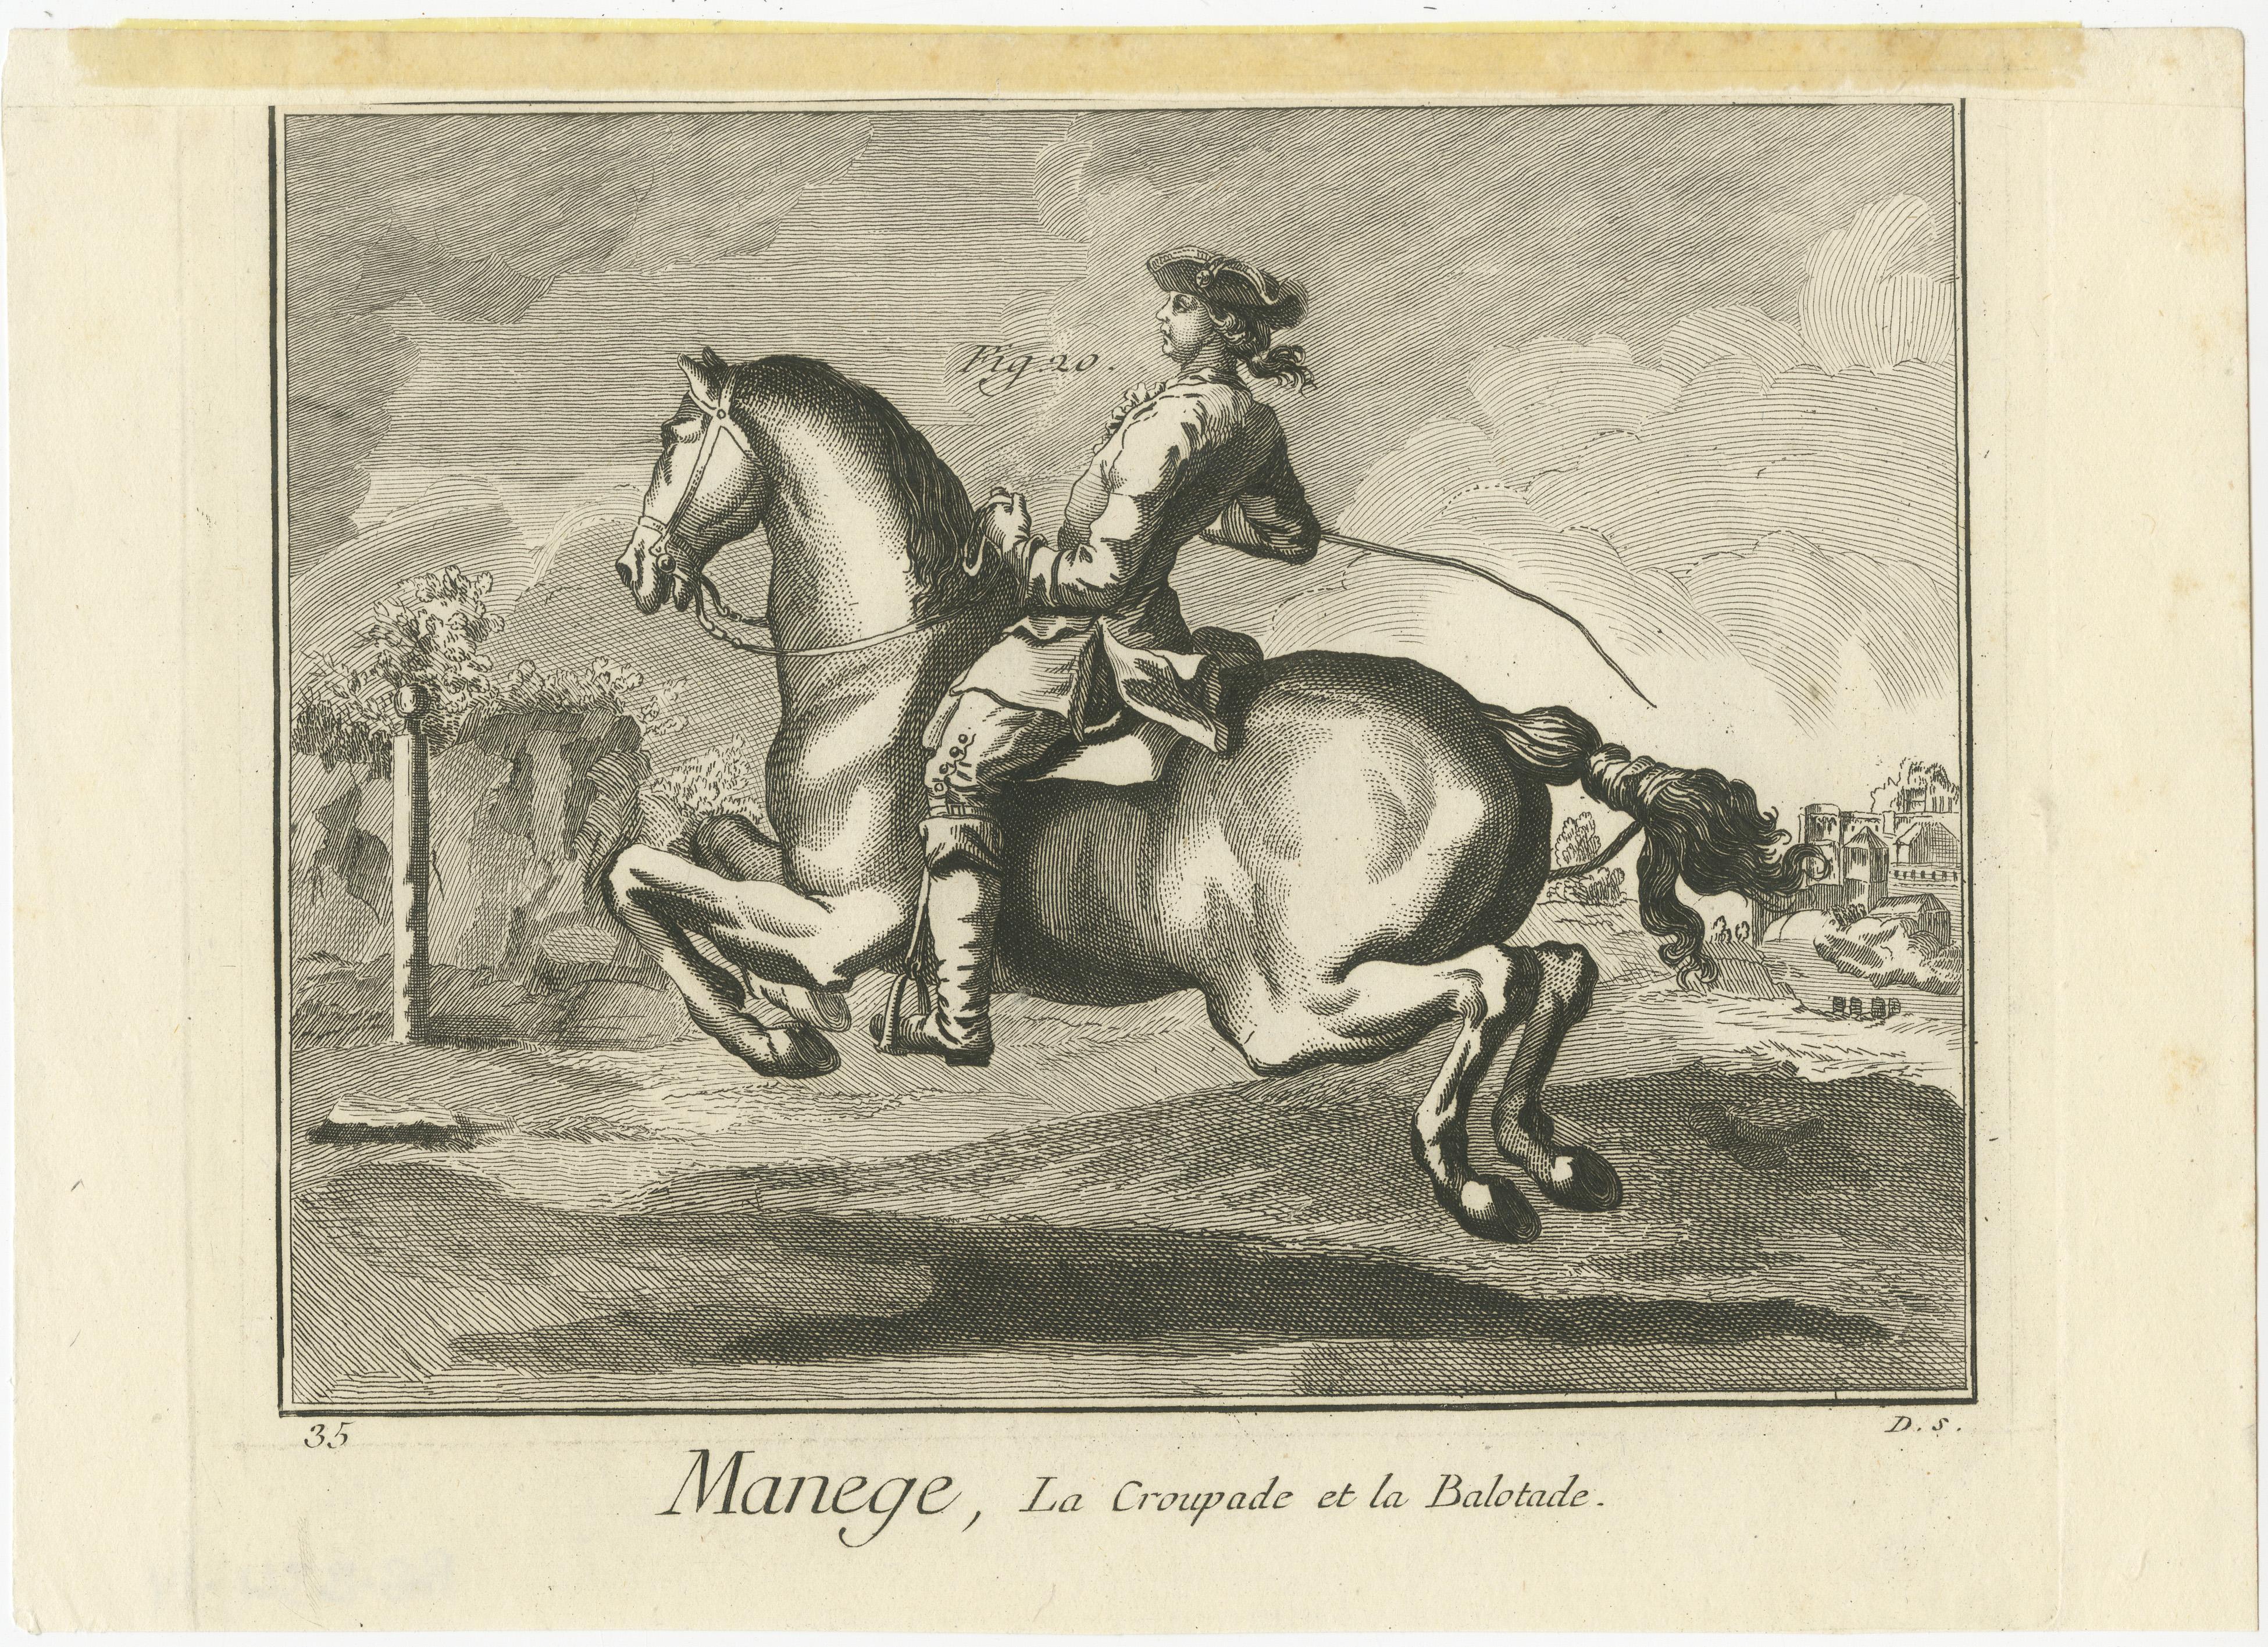 Antique print titled 'Manege, la Croupade et la Balotade'. Copper engraving of horse riding: ballotade. Ballotade is a forward leap performed by a horse trained in manège in which fore and hind legs are gathered under the body and the hind hoofs are